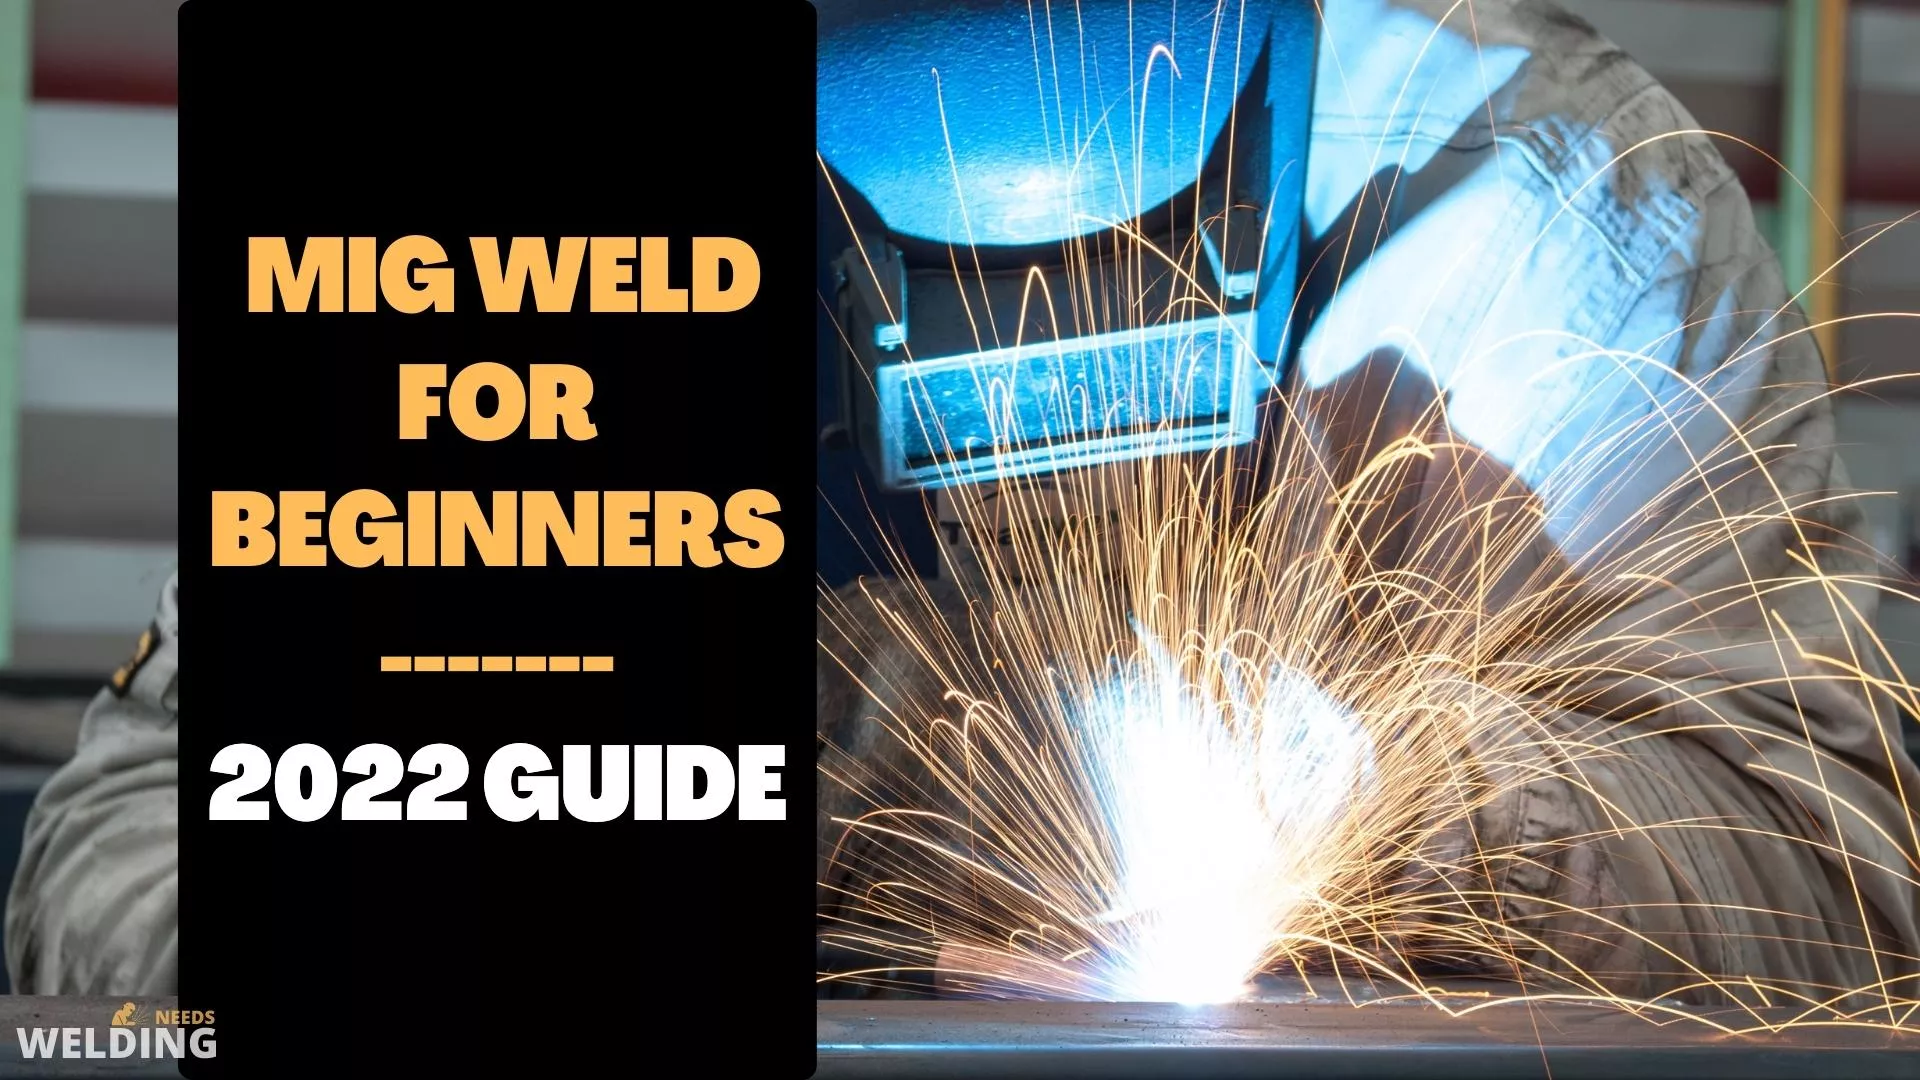 How to MiG Weld for Beginners – A Guide